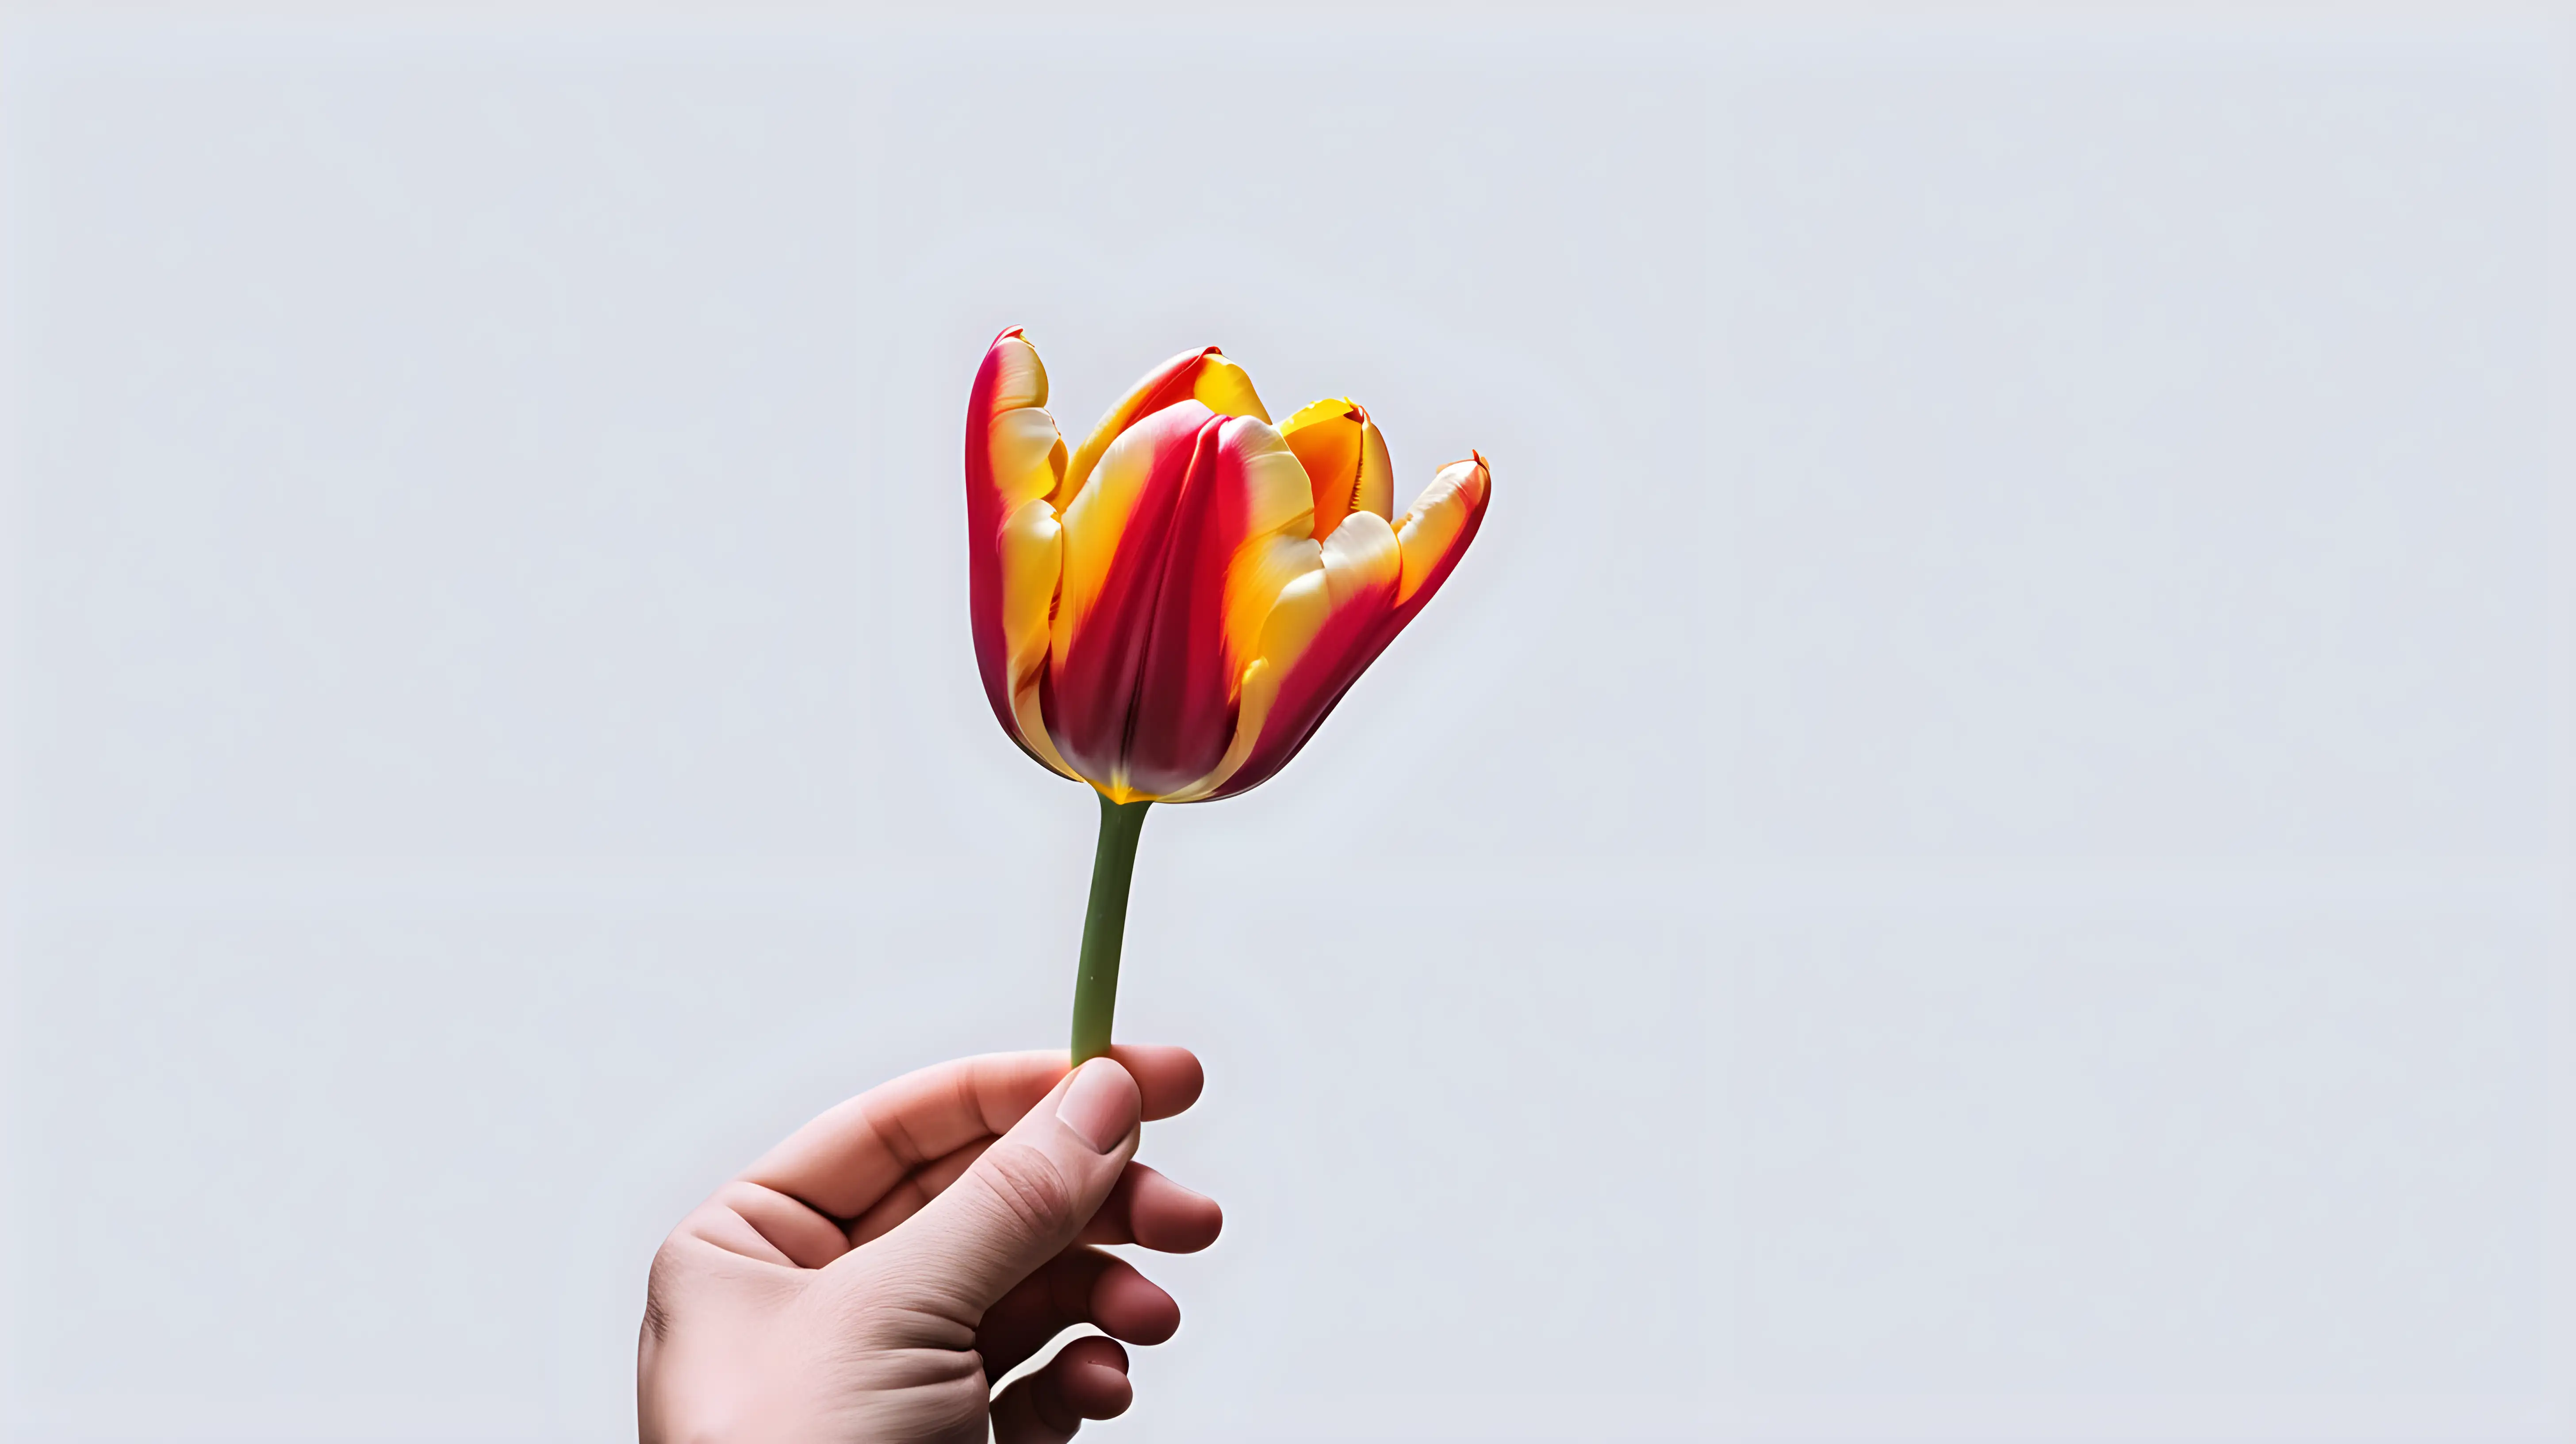 Hand holding a single, blooming tulip.